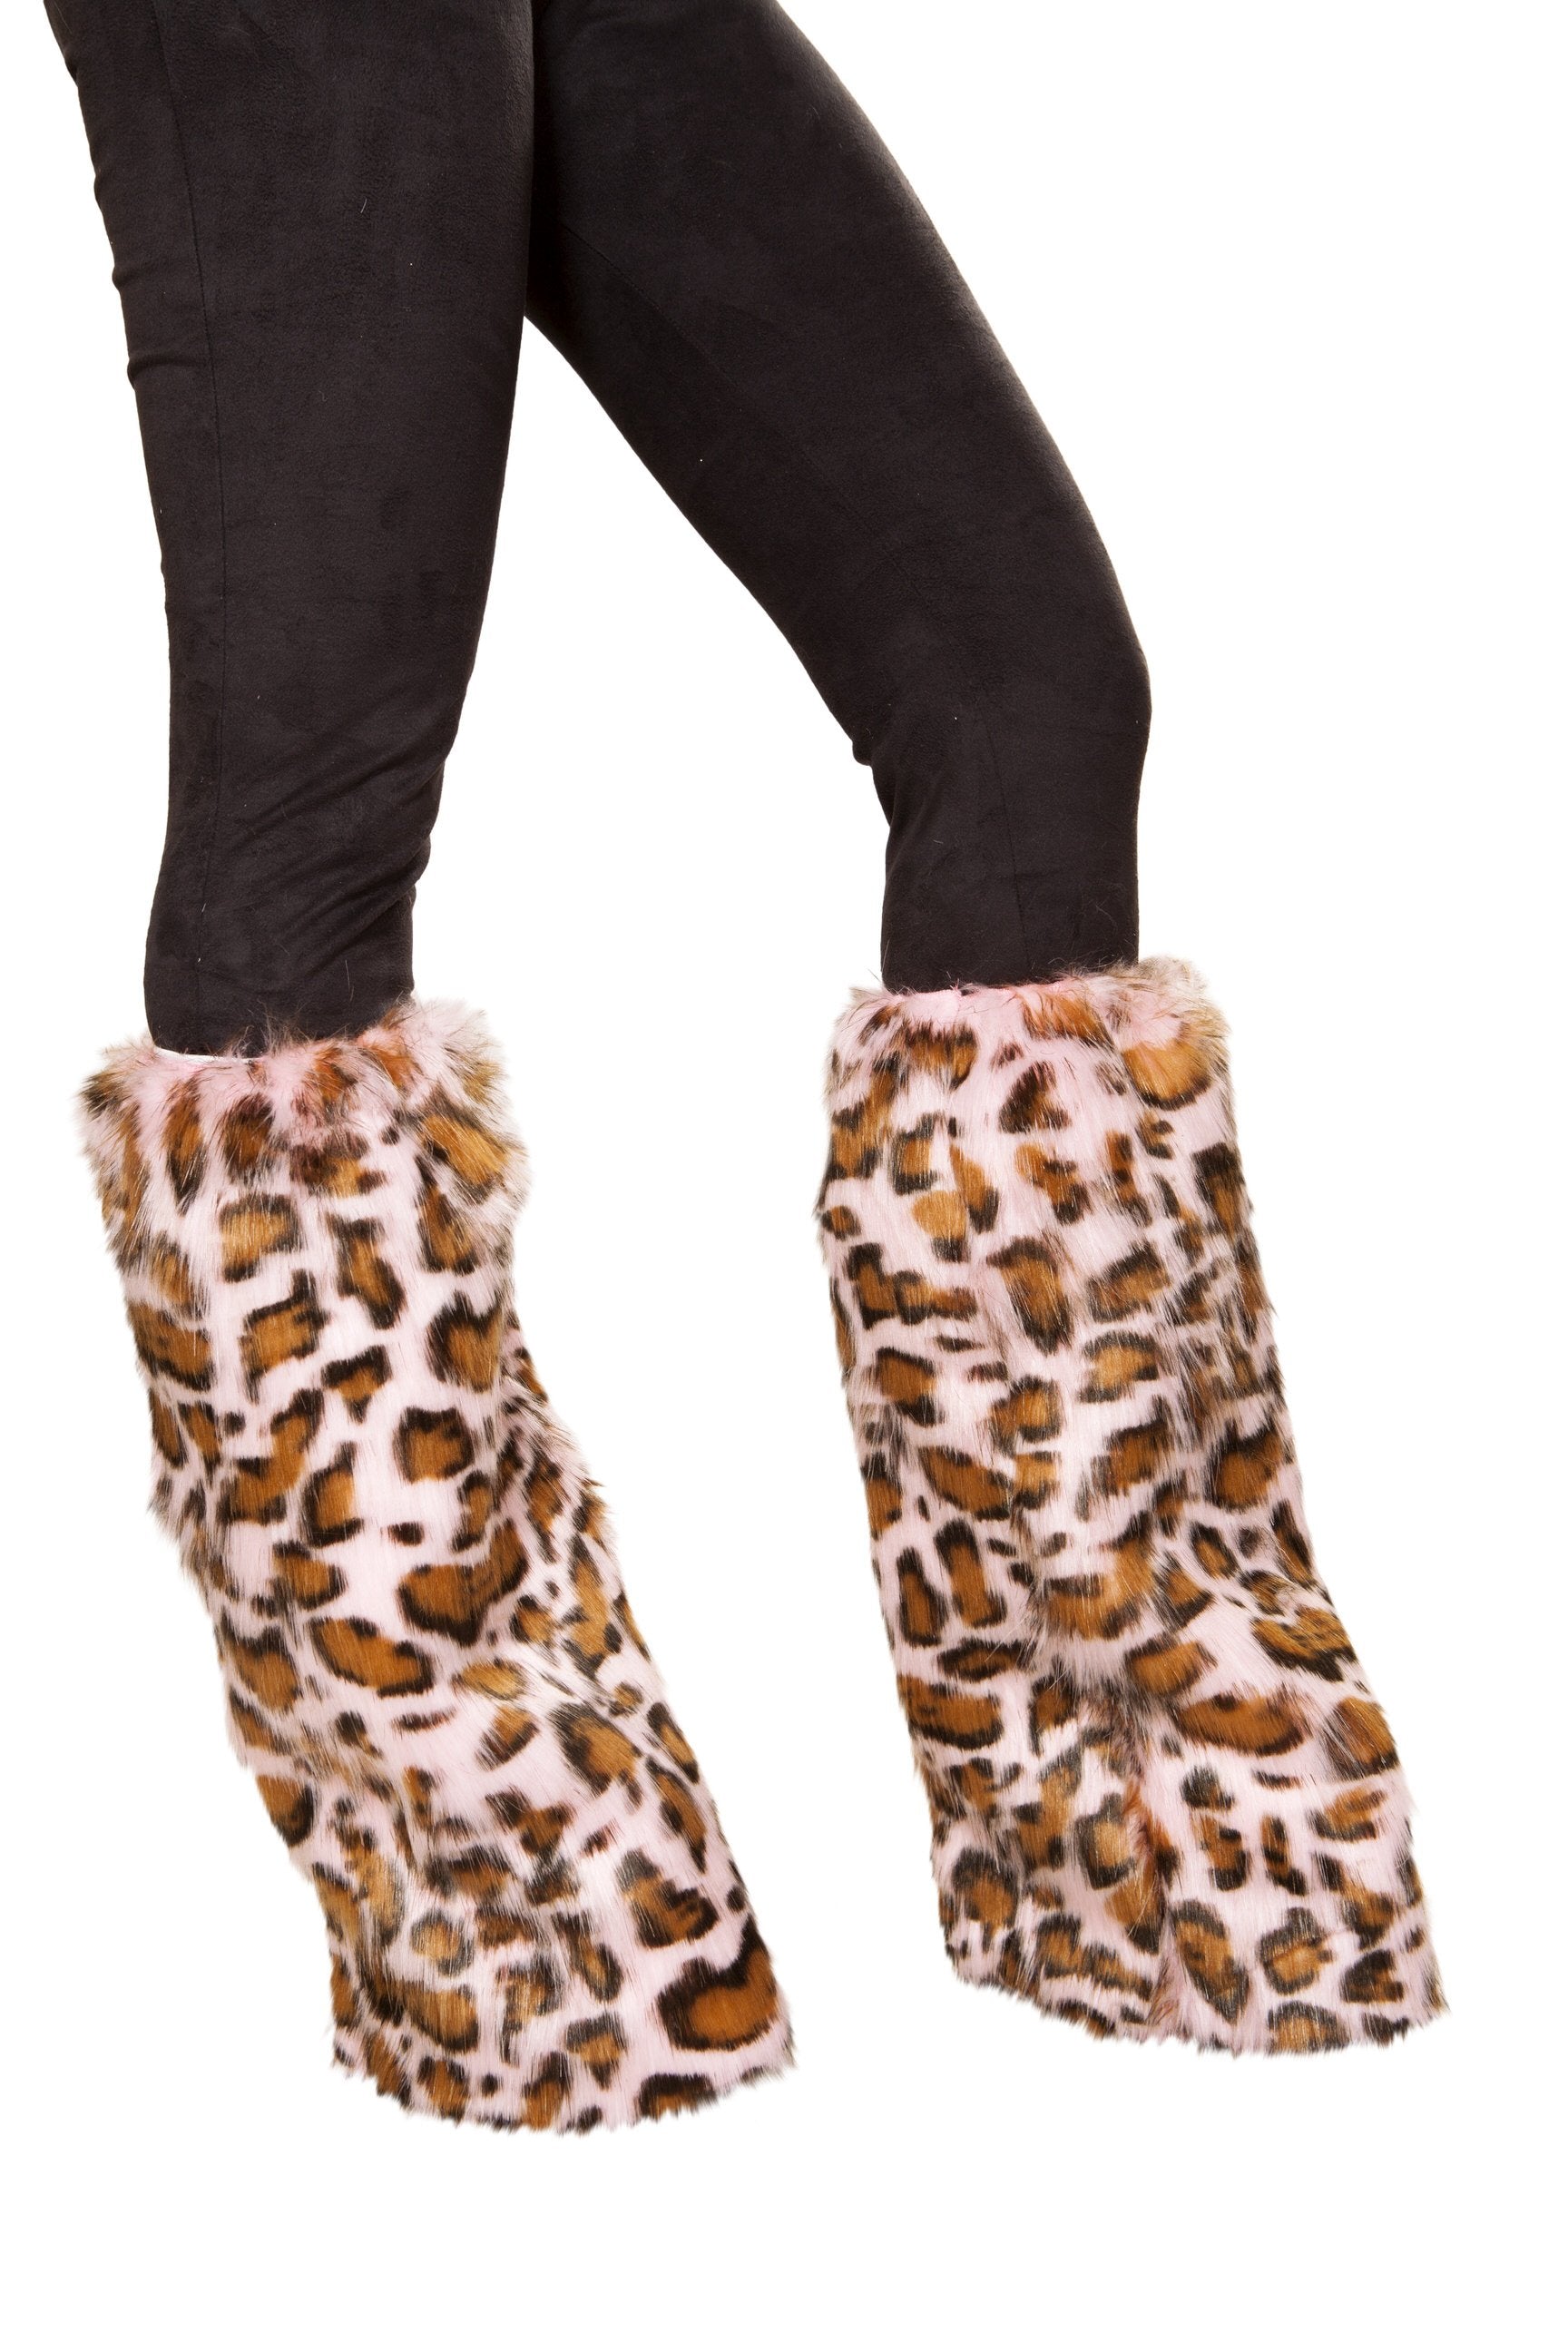 4889 - Roma Costume Pair of Pink Leopard Leg Warmers